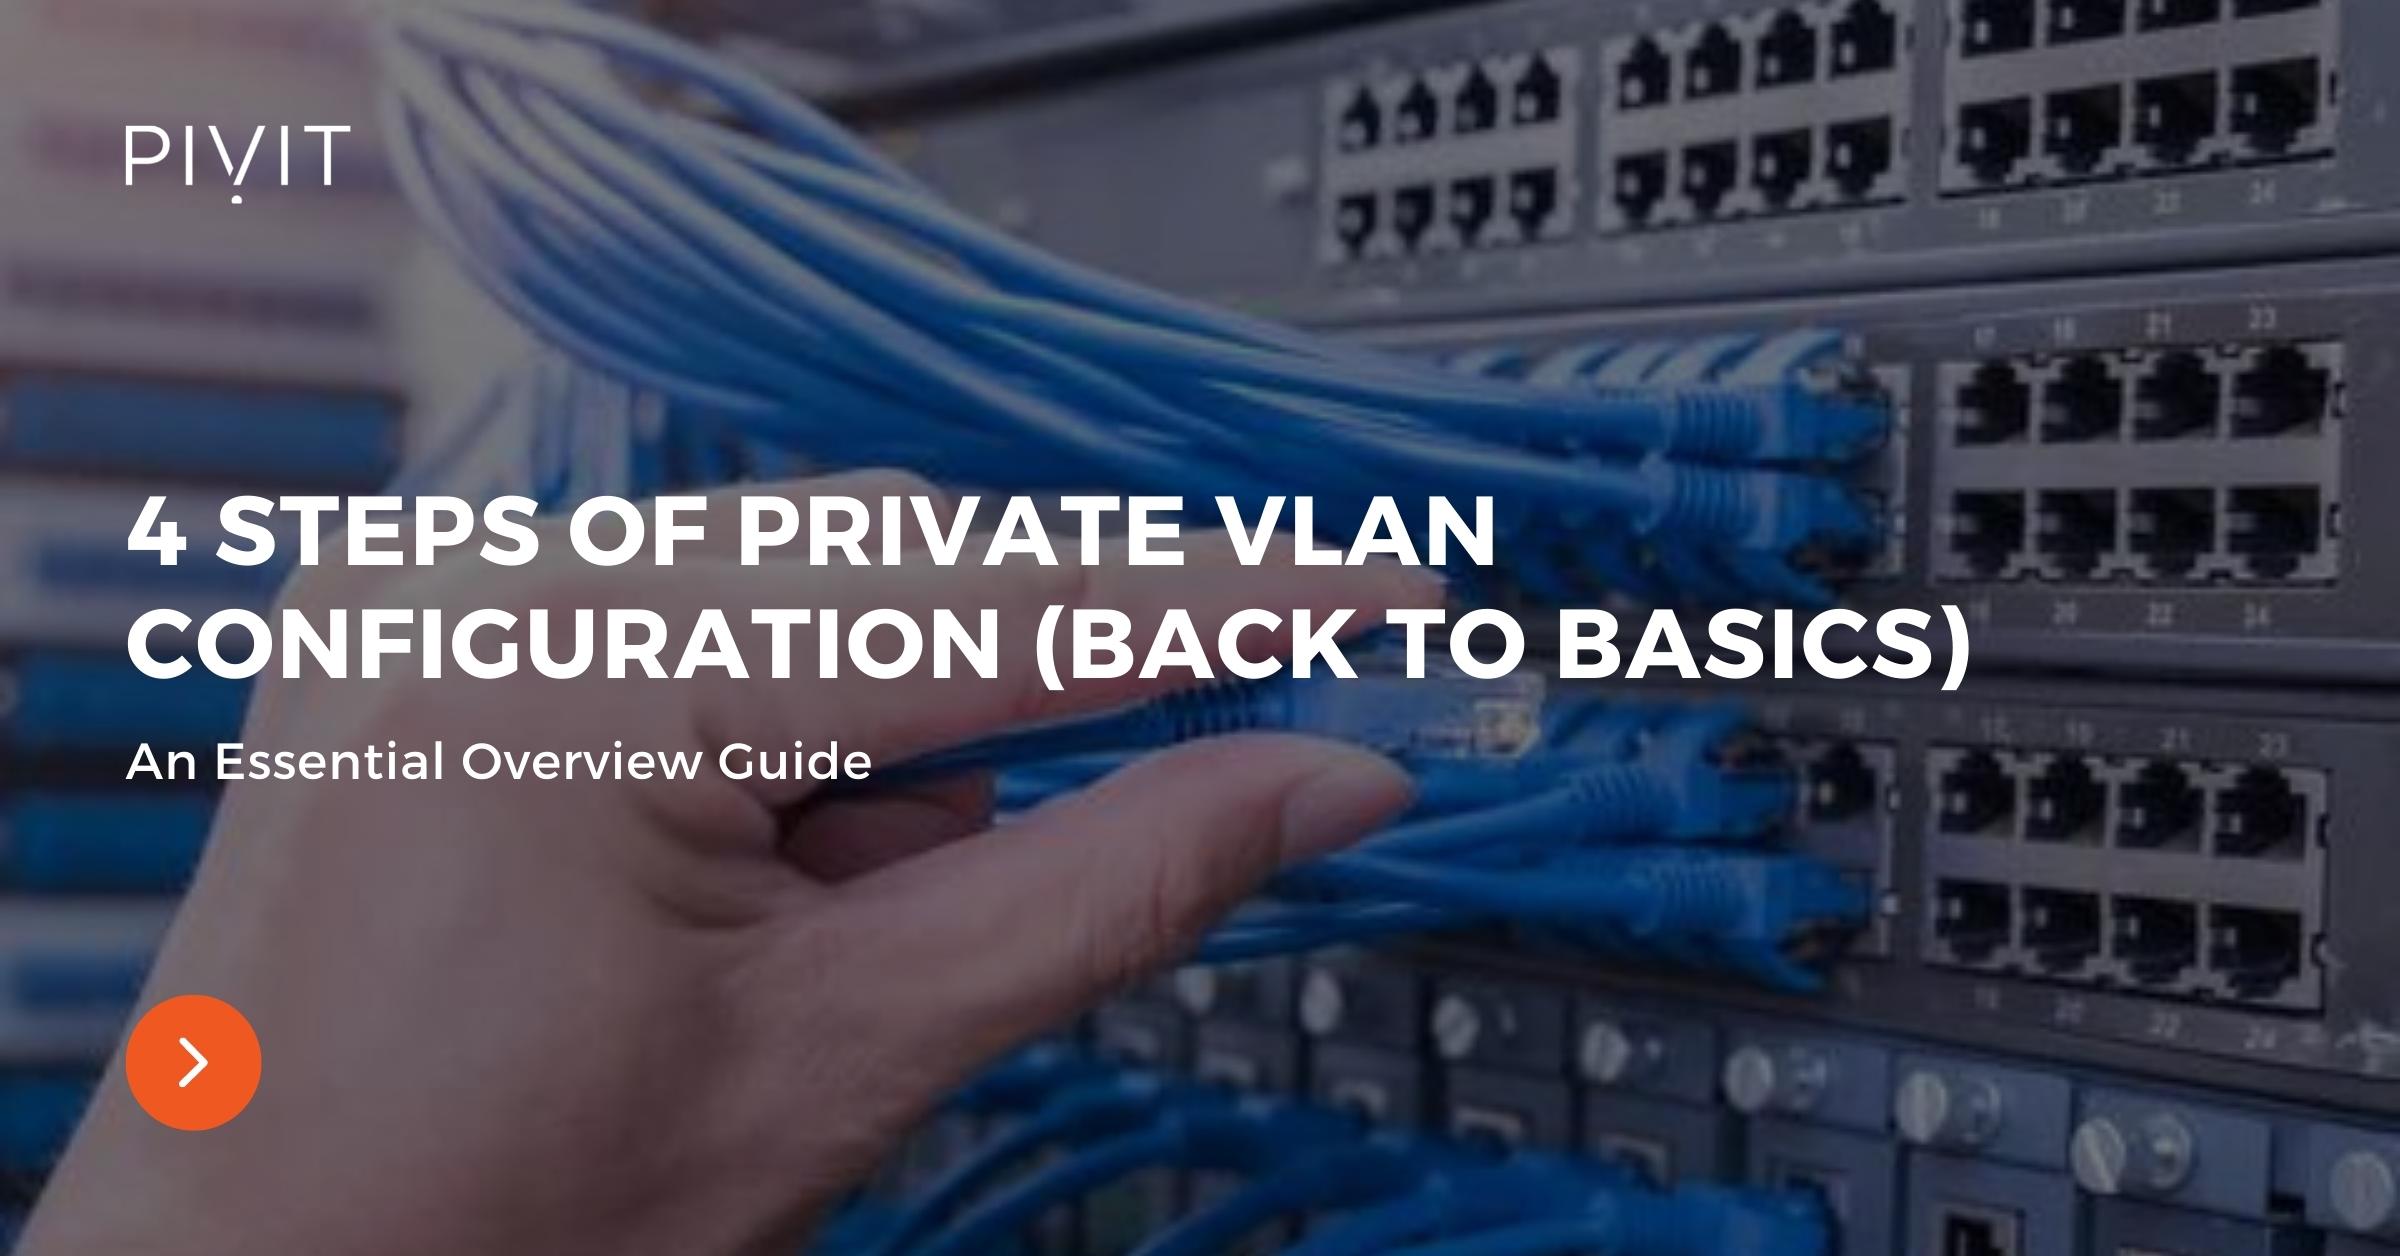 4 Steps of Private VLAN Configuration (Back to Basics) - An Essential Overview Guide